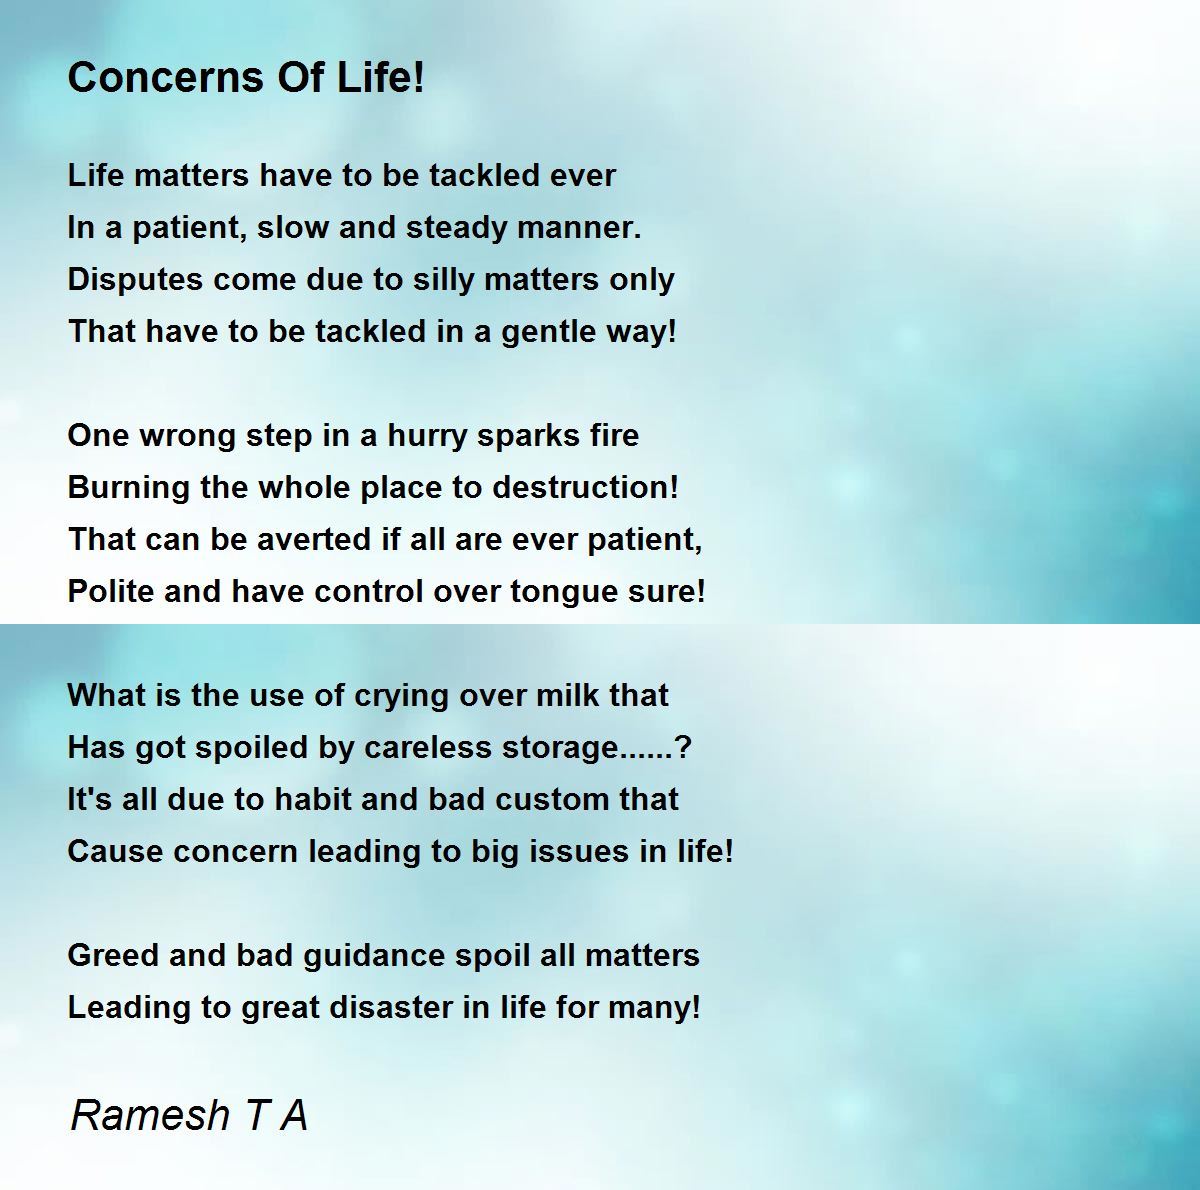 Concerns Of Life! - Concerns Of Life! Poem by Ramesh T A